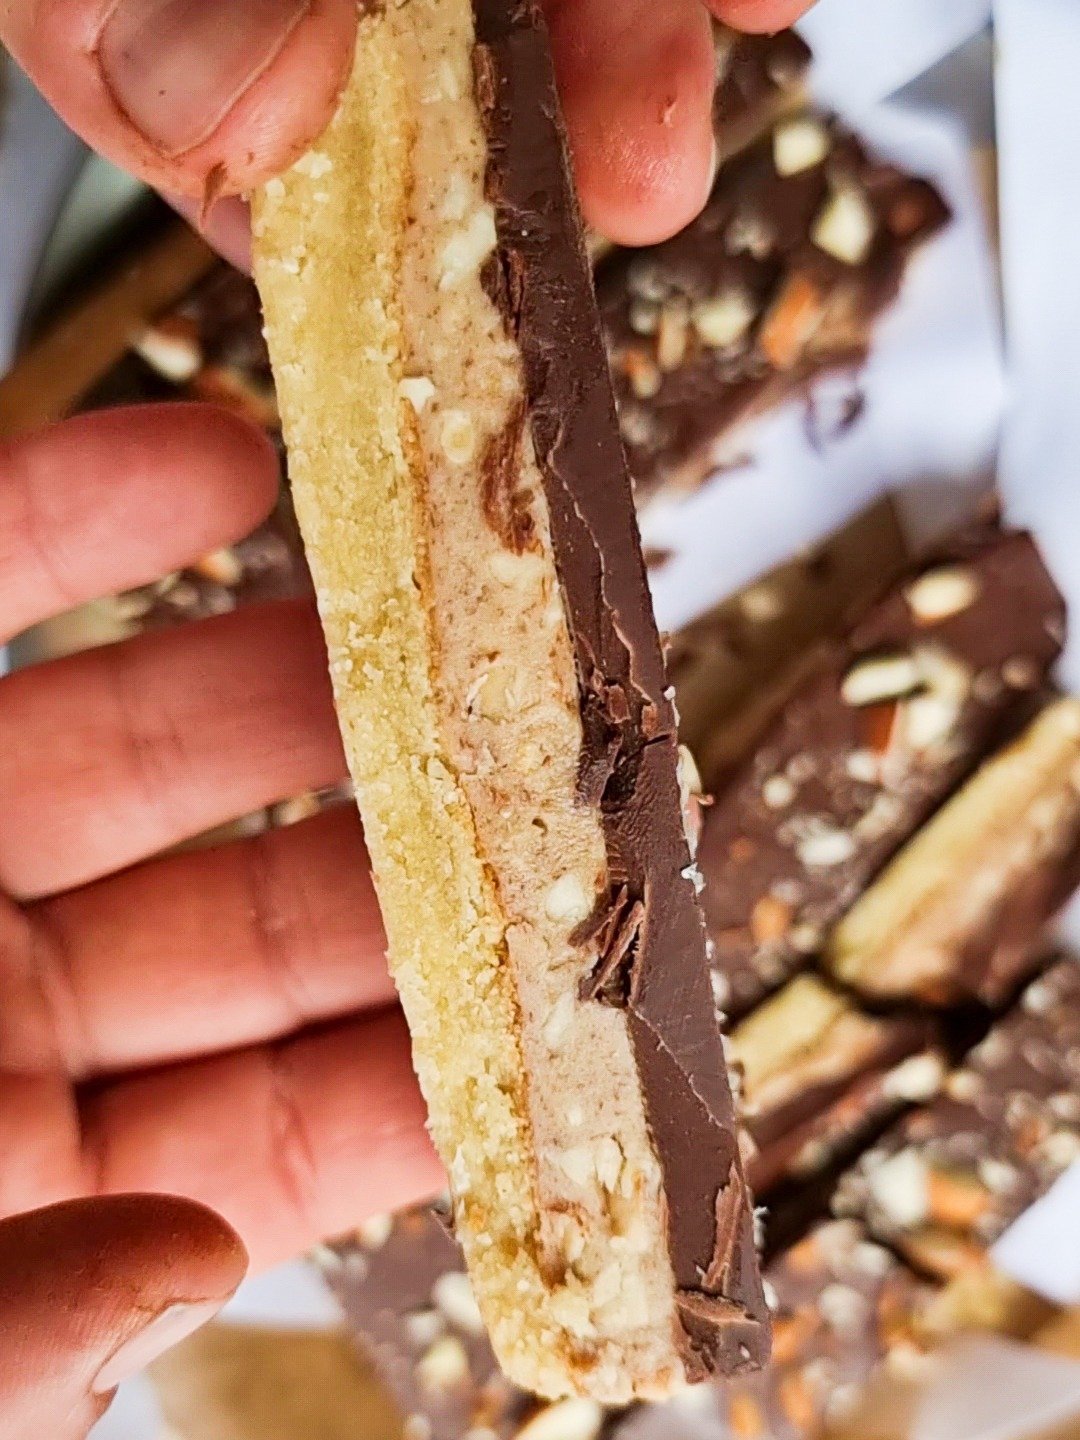 Homemade Gluten-Free Reese’s Peanut Butter Bars made of three layers: almond flour and sweetener, peanut butter, and chocolate are perfect to indulge your dear ones.